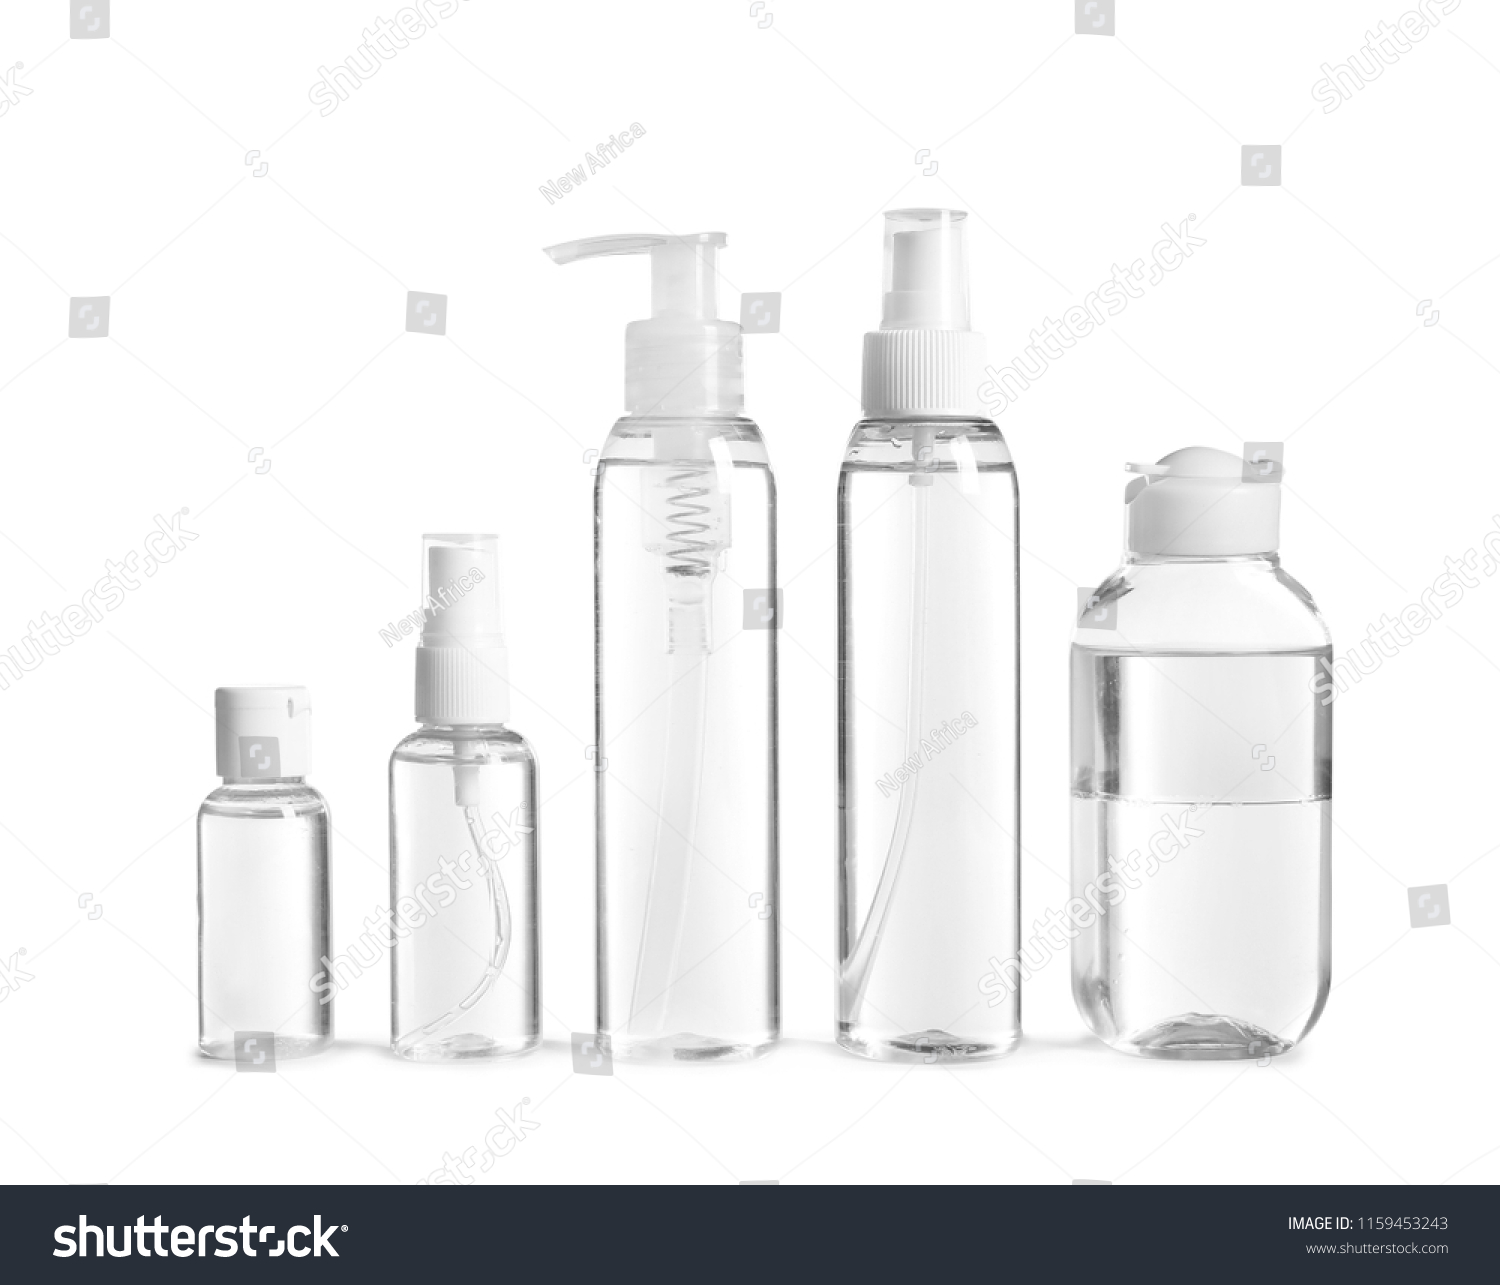 Different cosmetic bottles on white background #1159453243